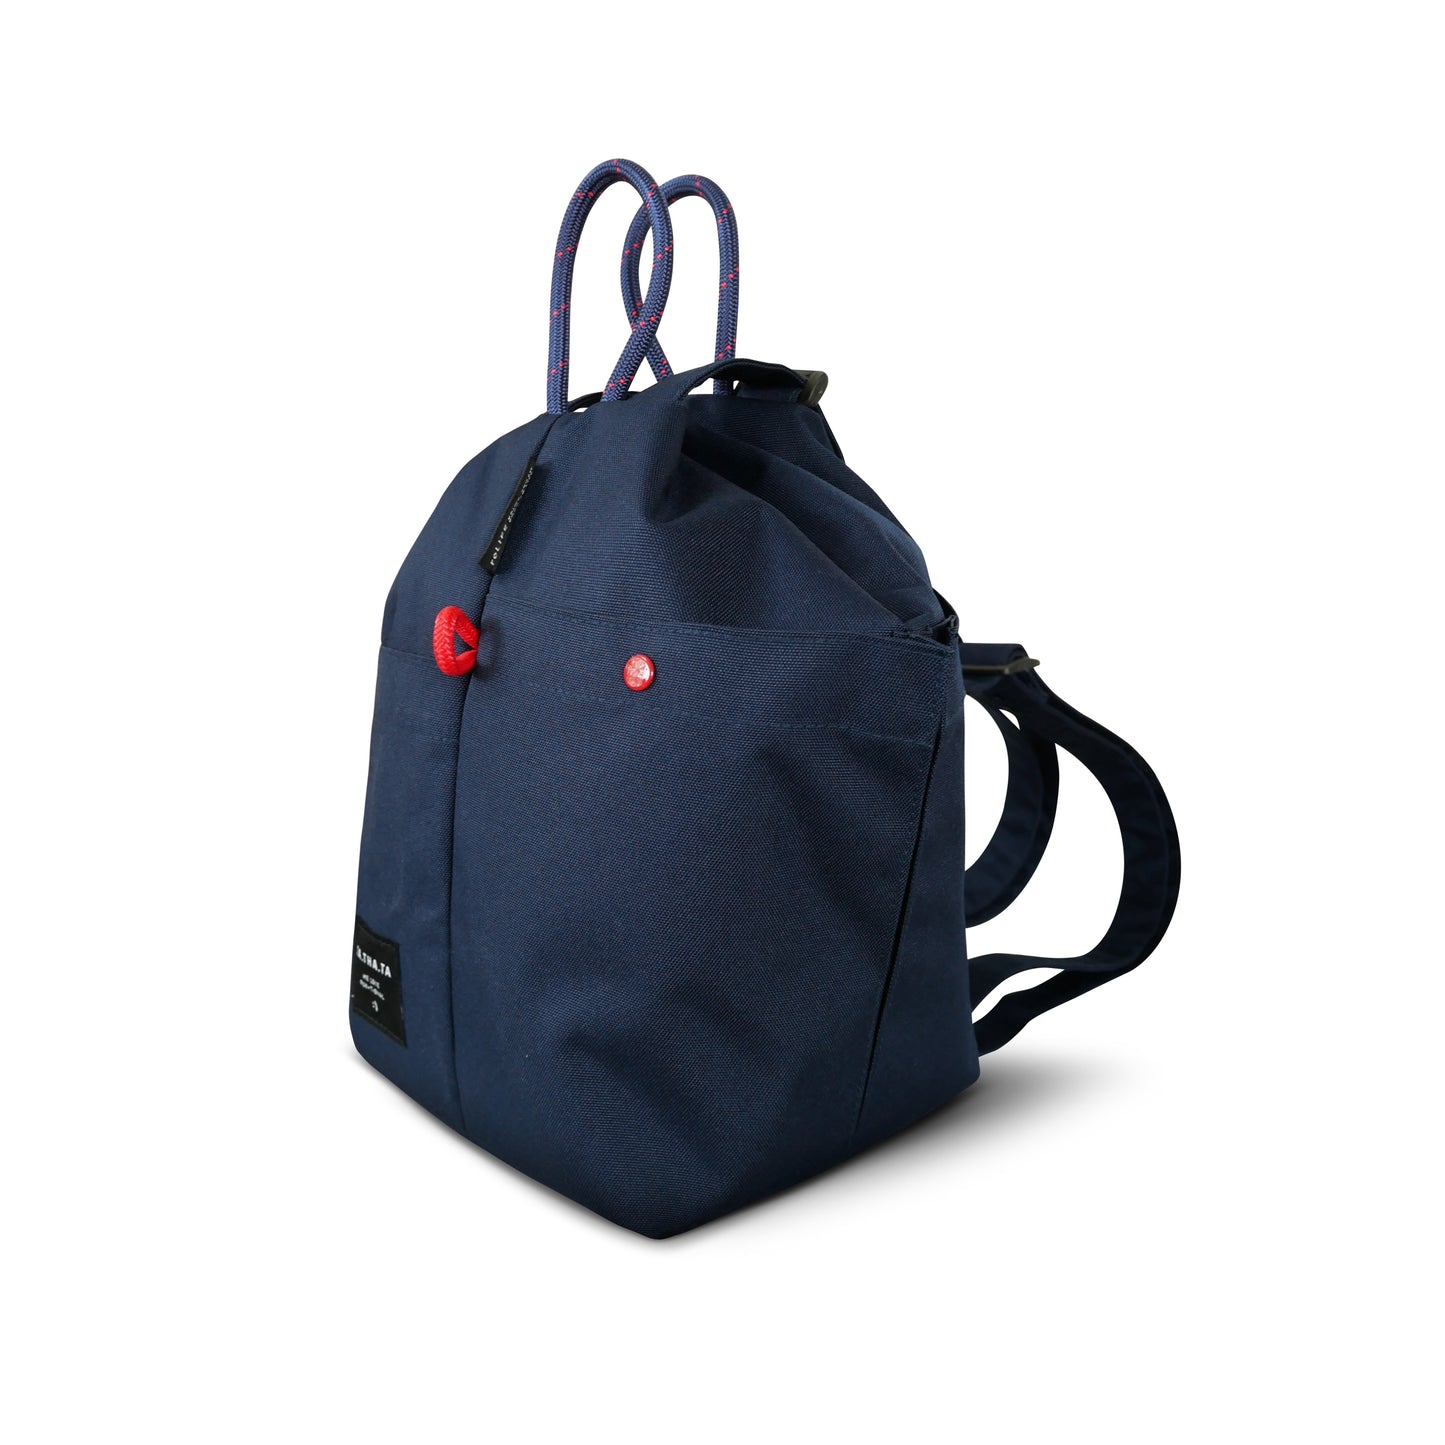 Onion head relife charcoal navy bag